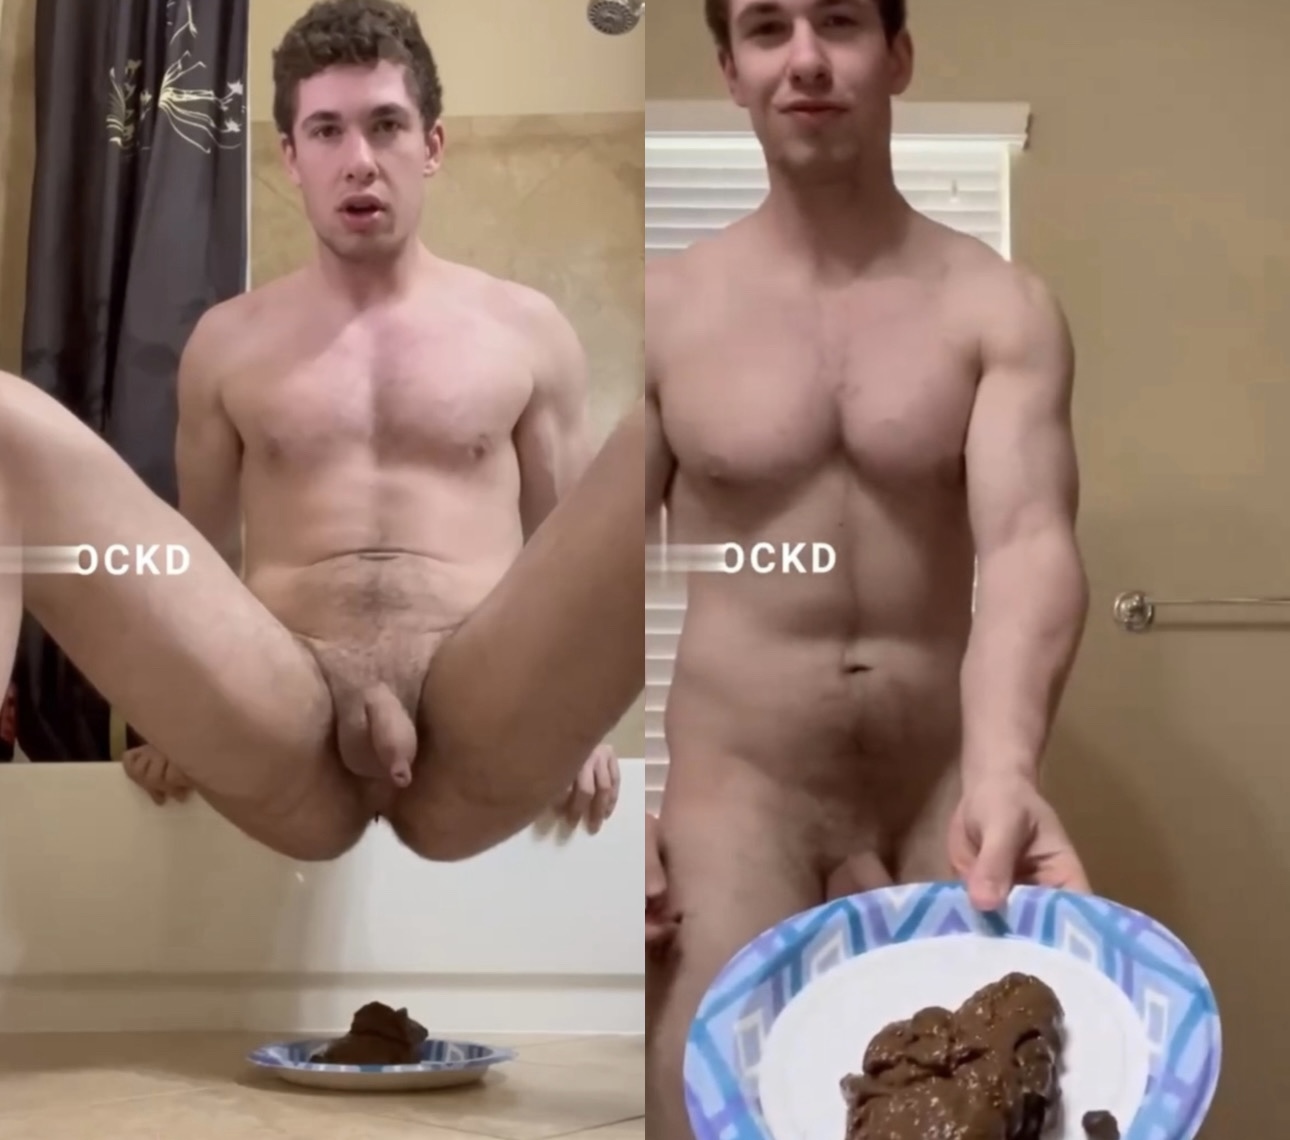 Canadian college jock makes a meal